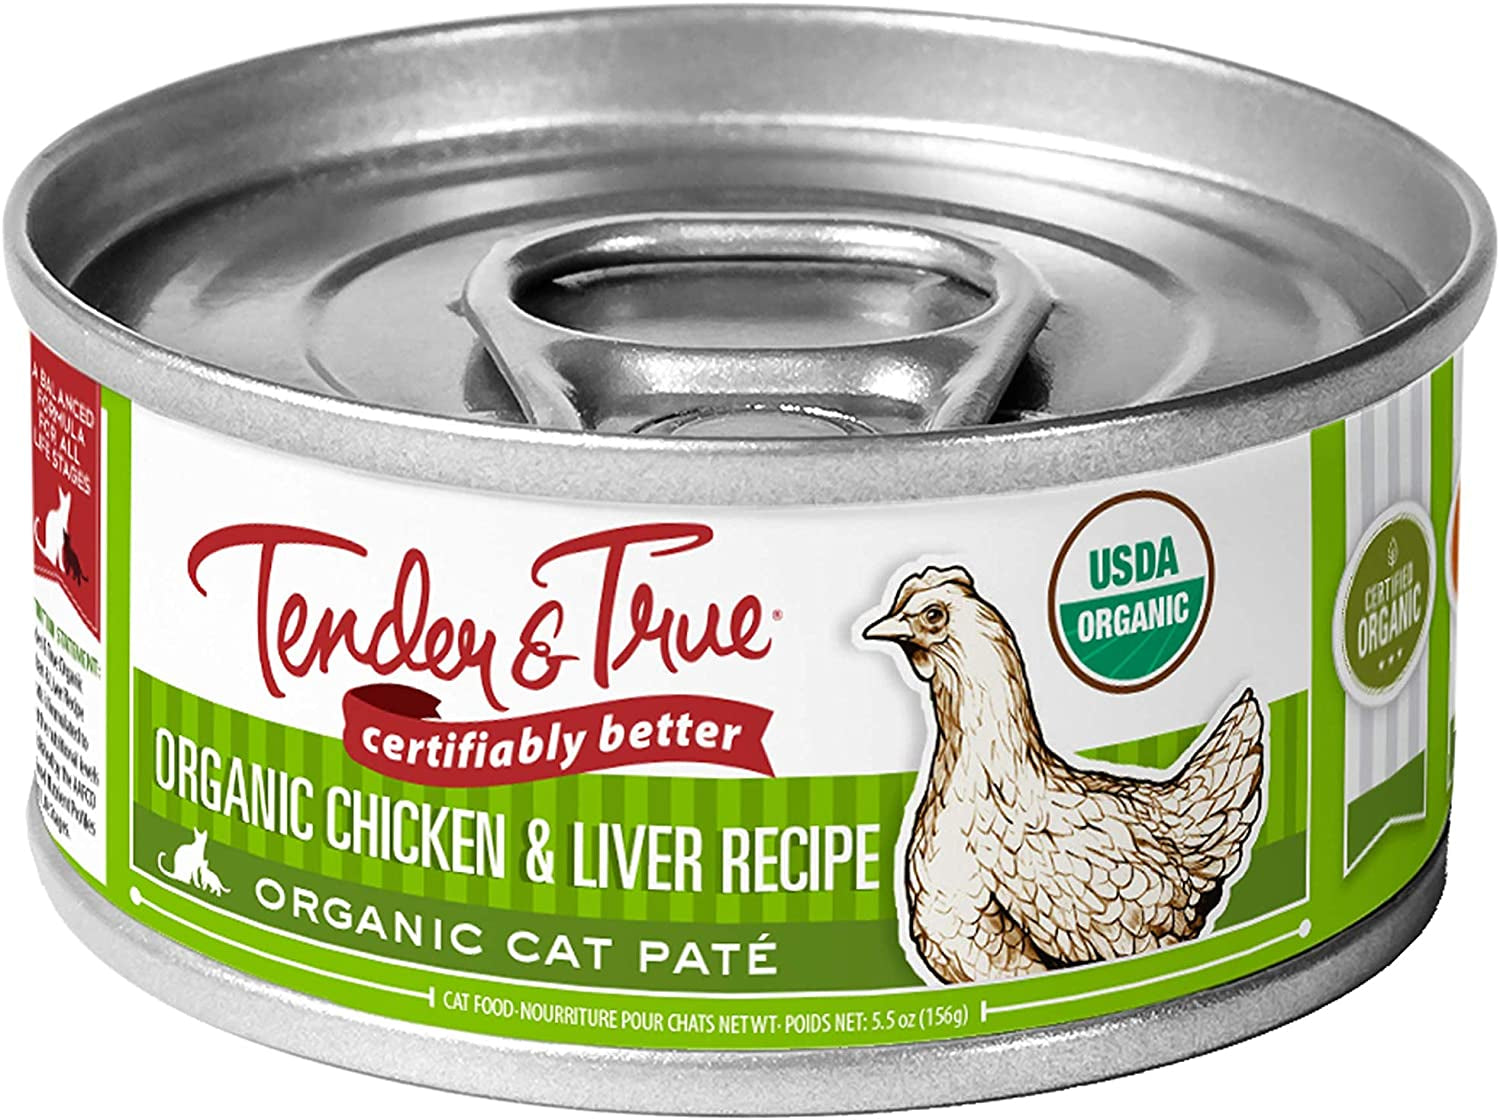 Tender & True Organic Chicken & Liver Recipe Canned Cat Food, 5.5 Oz, Case of 24